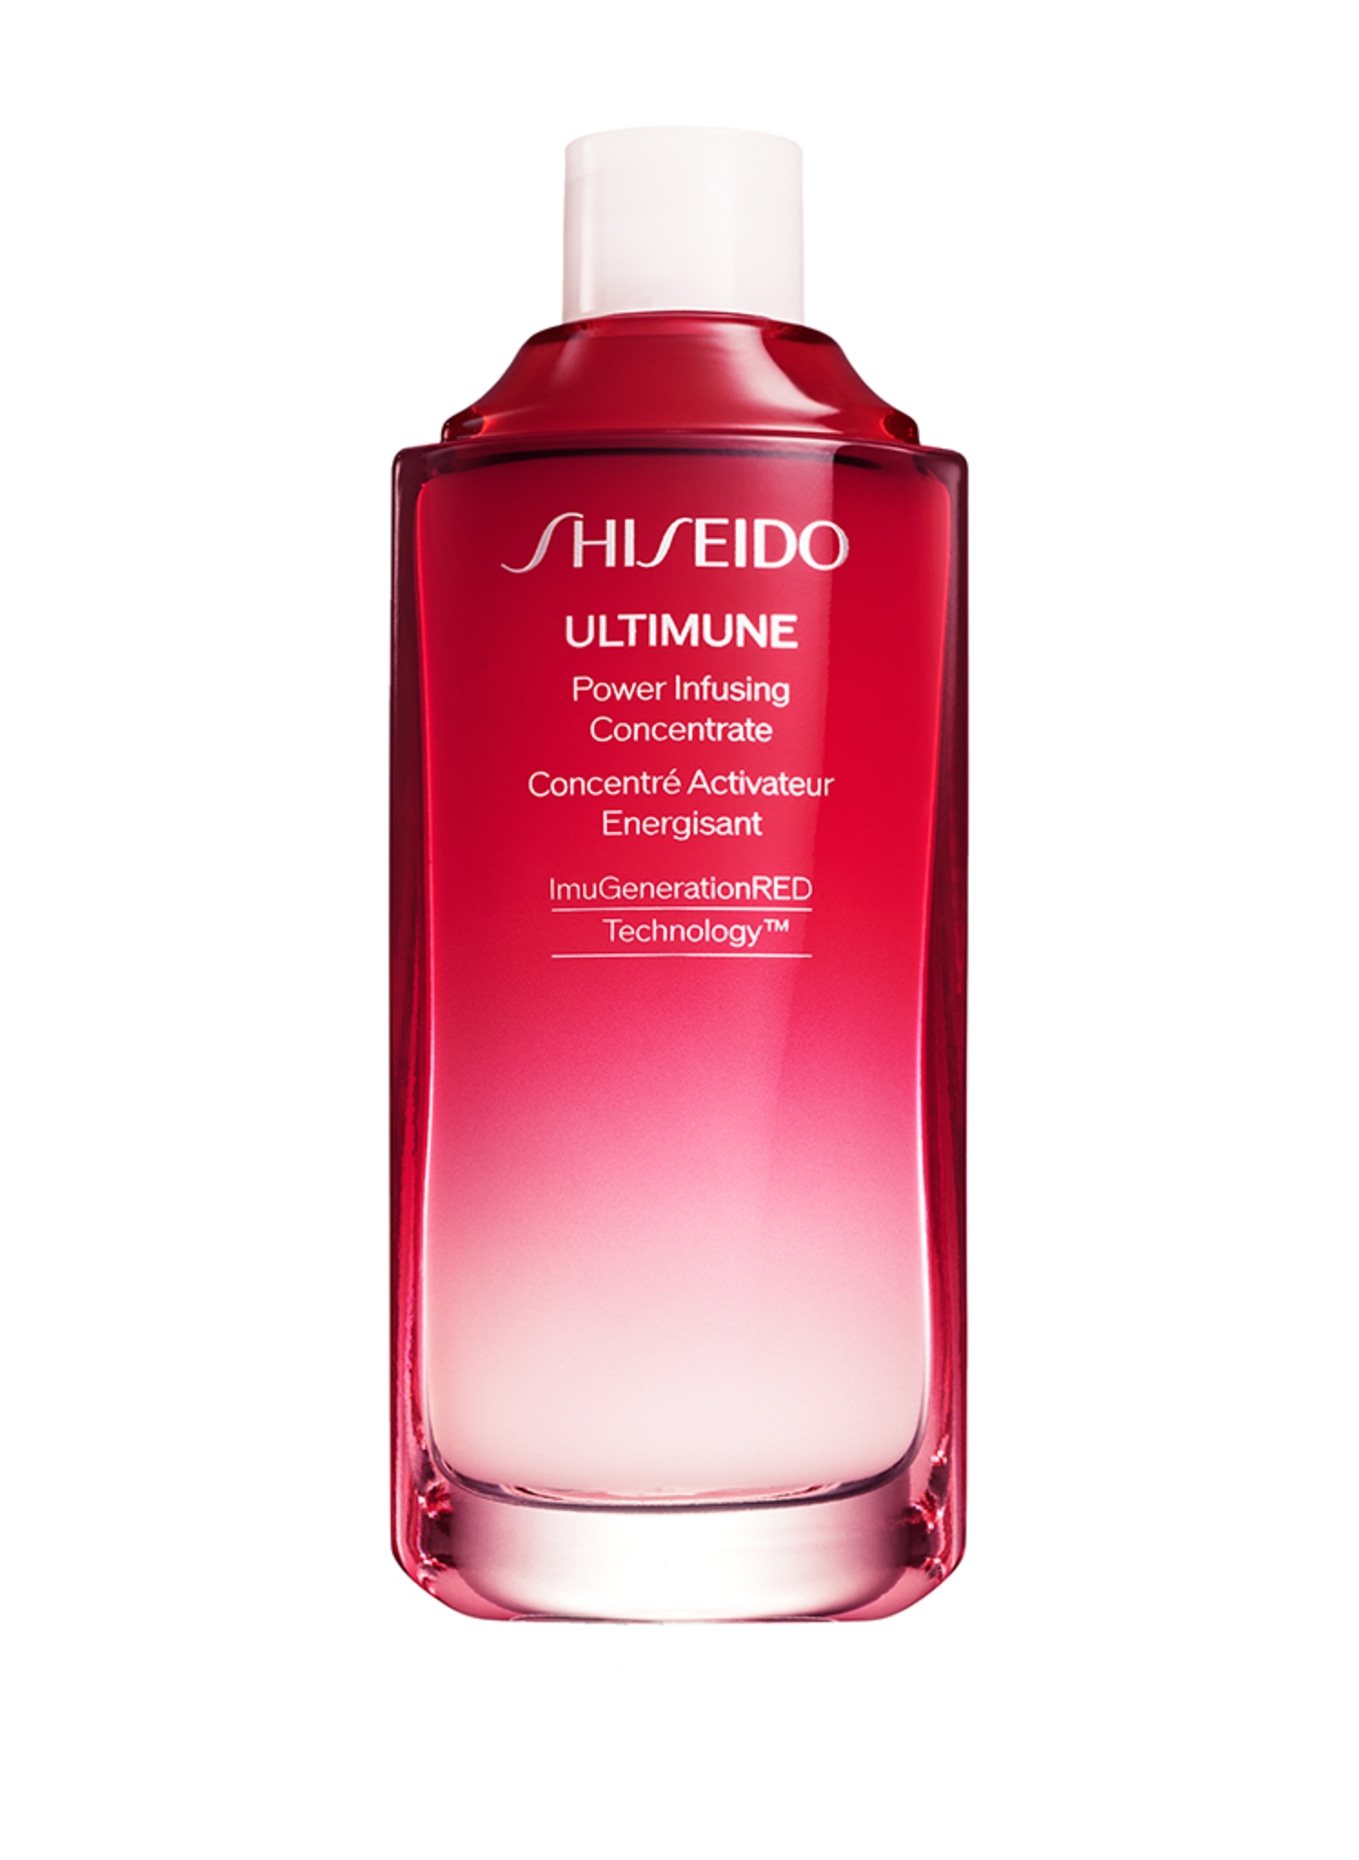 SHISEIDO ULTIMUNE POWER INFUSING CONCENTRATE REFILL (Bild 1)